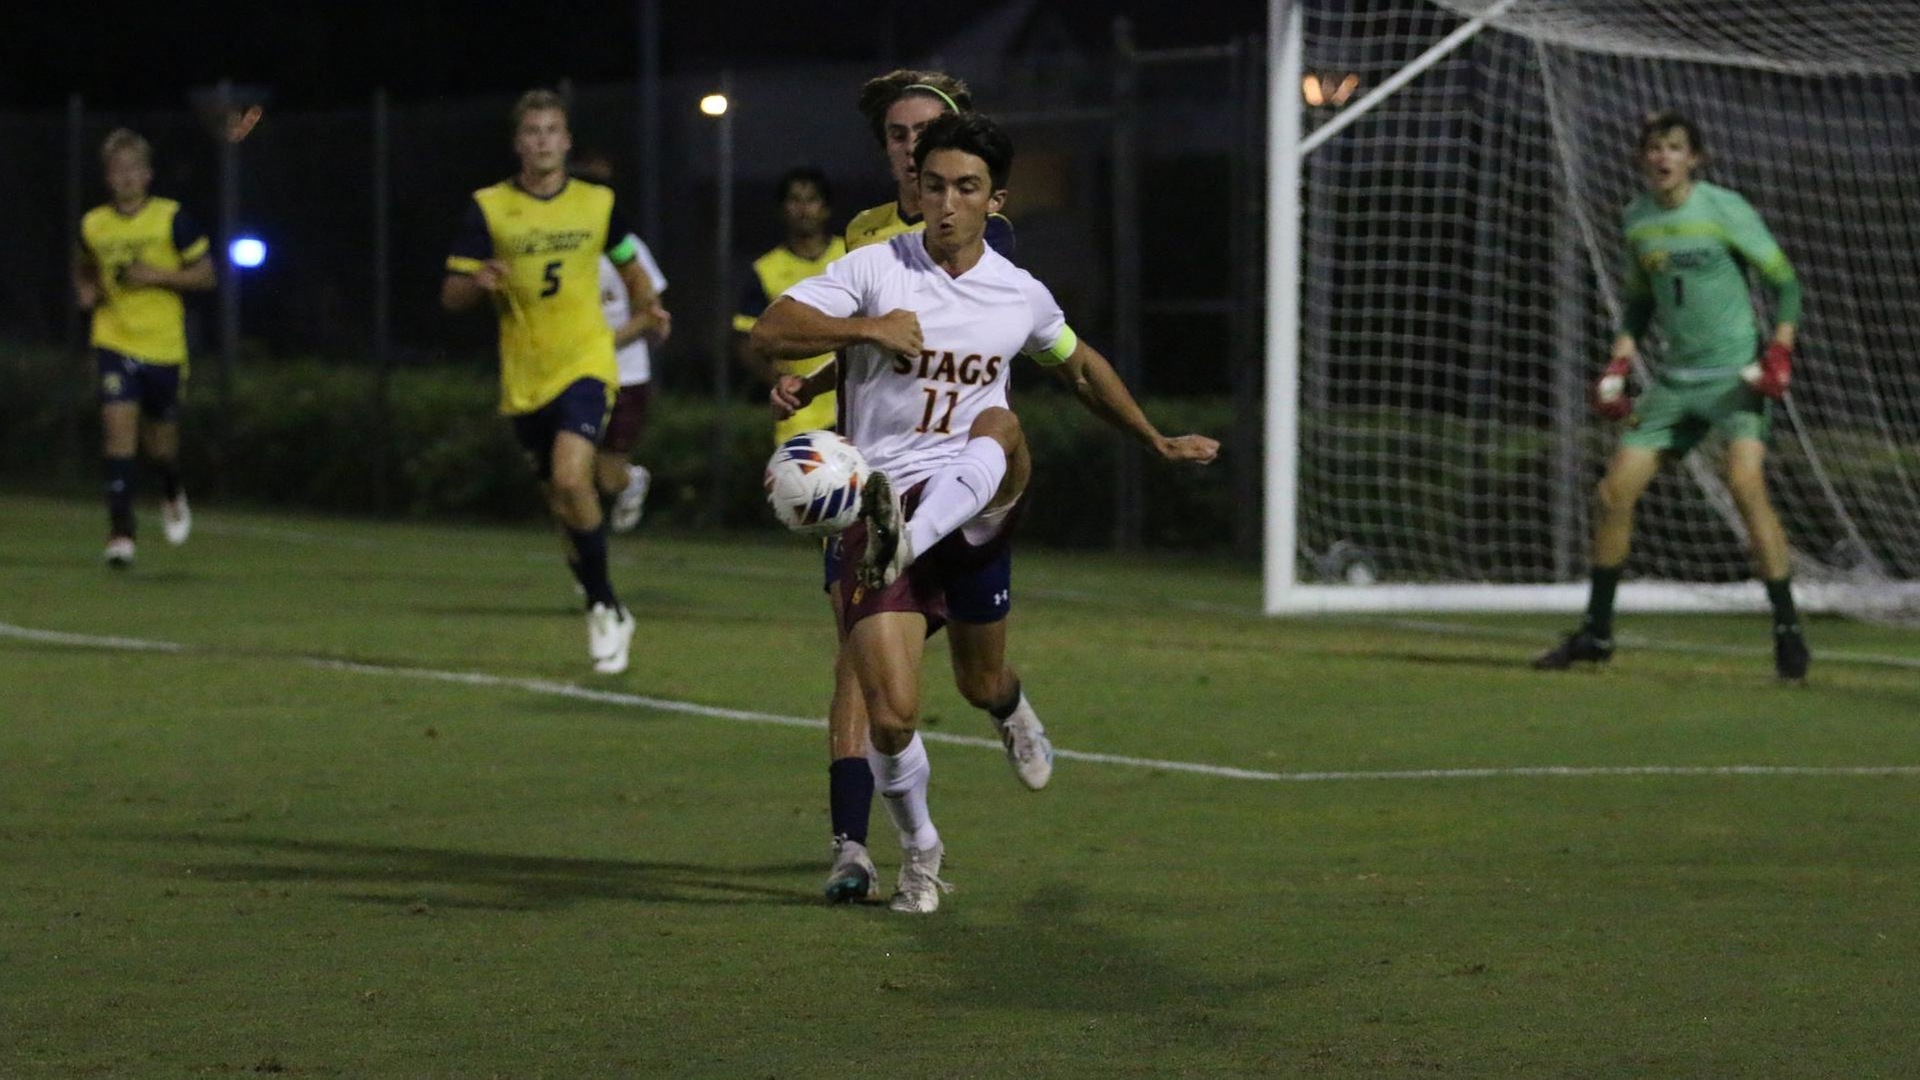 Jake Allmon had a goal and an assist for the Stags (photo by Eva Fernandez)